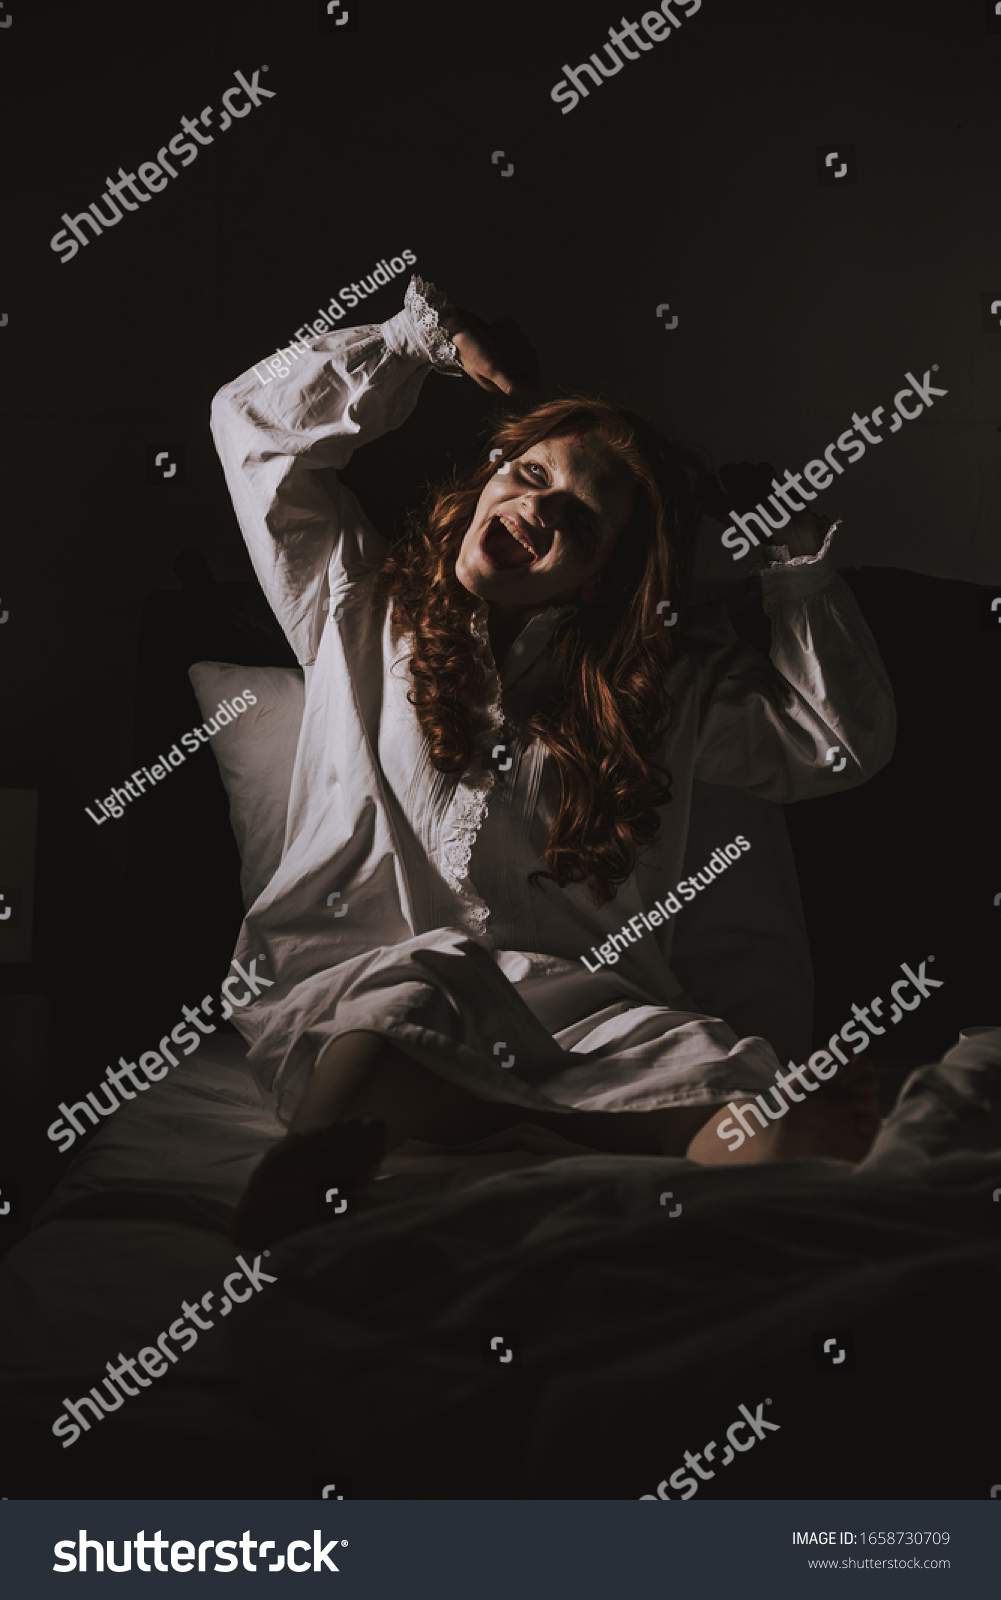 Paranormal Creepy Girl Nightgown Shouting Bed Stock Photo 1658730709 ...